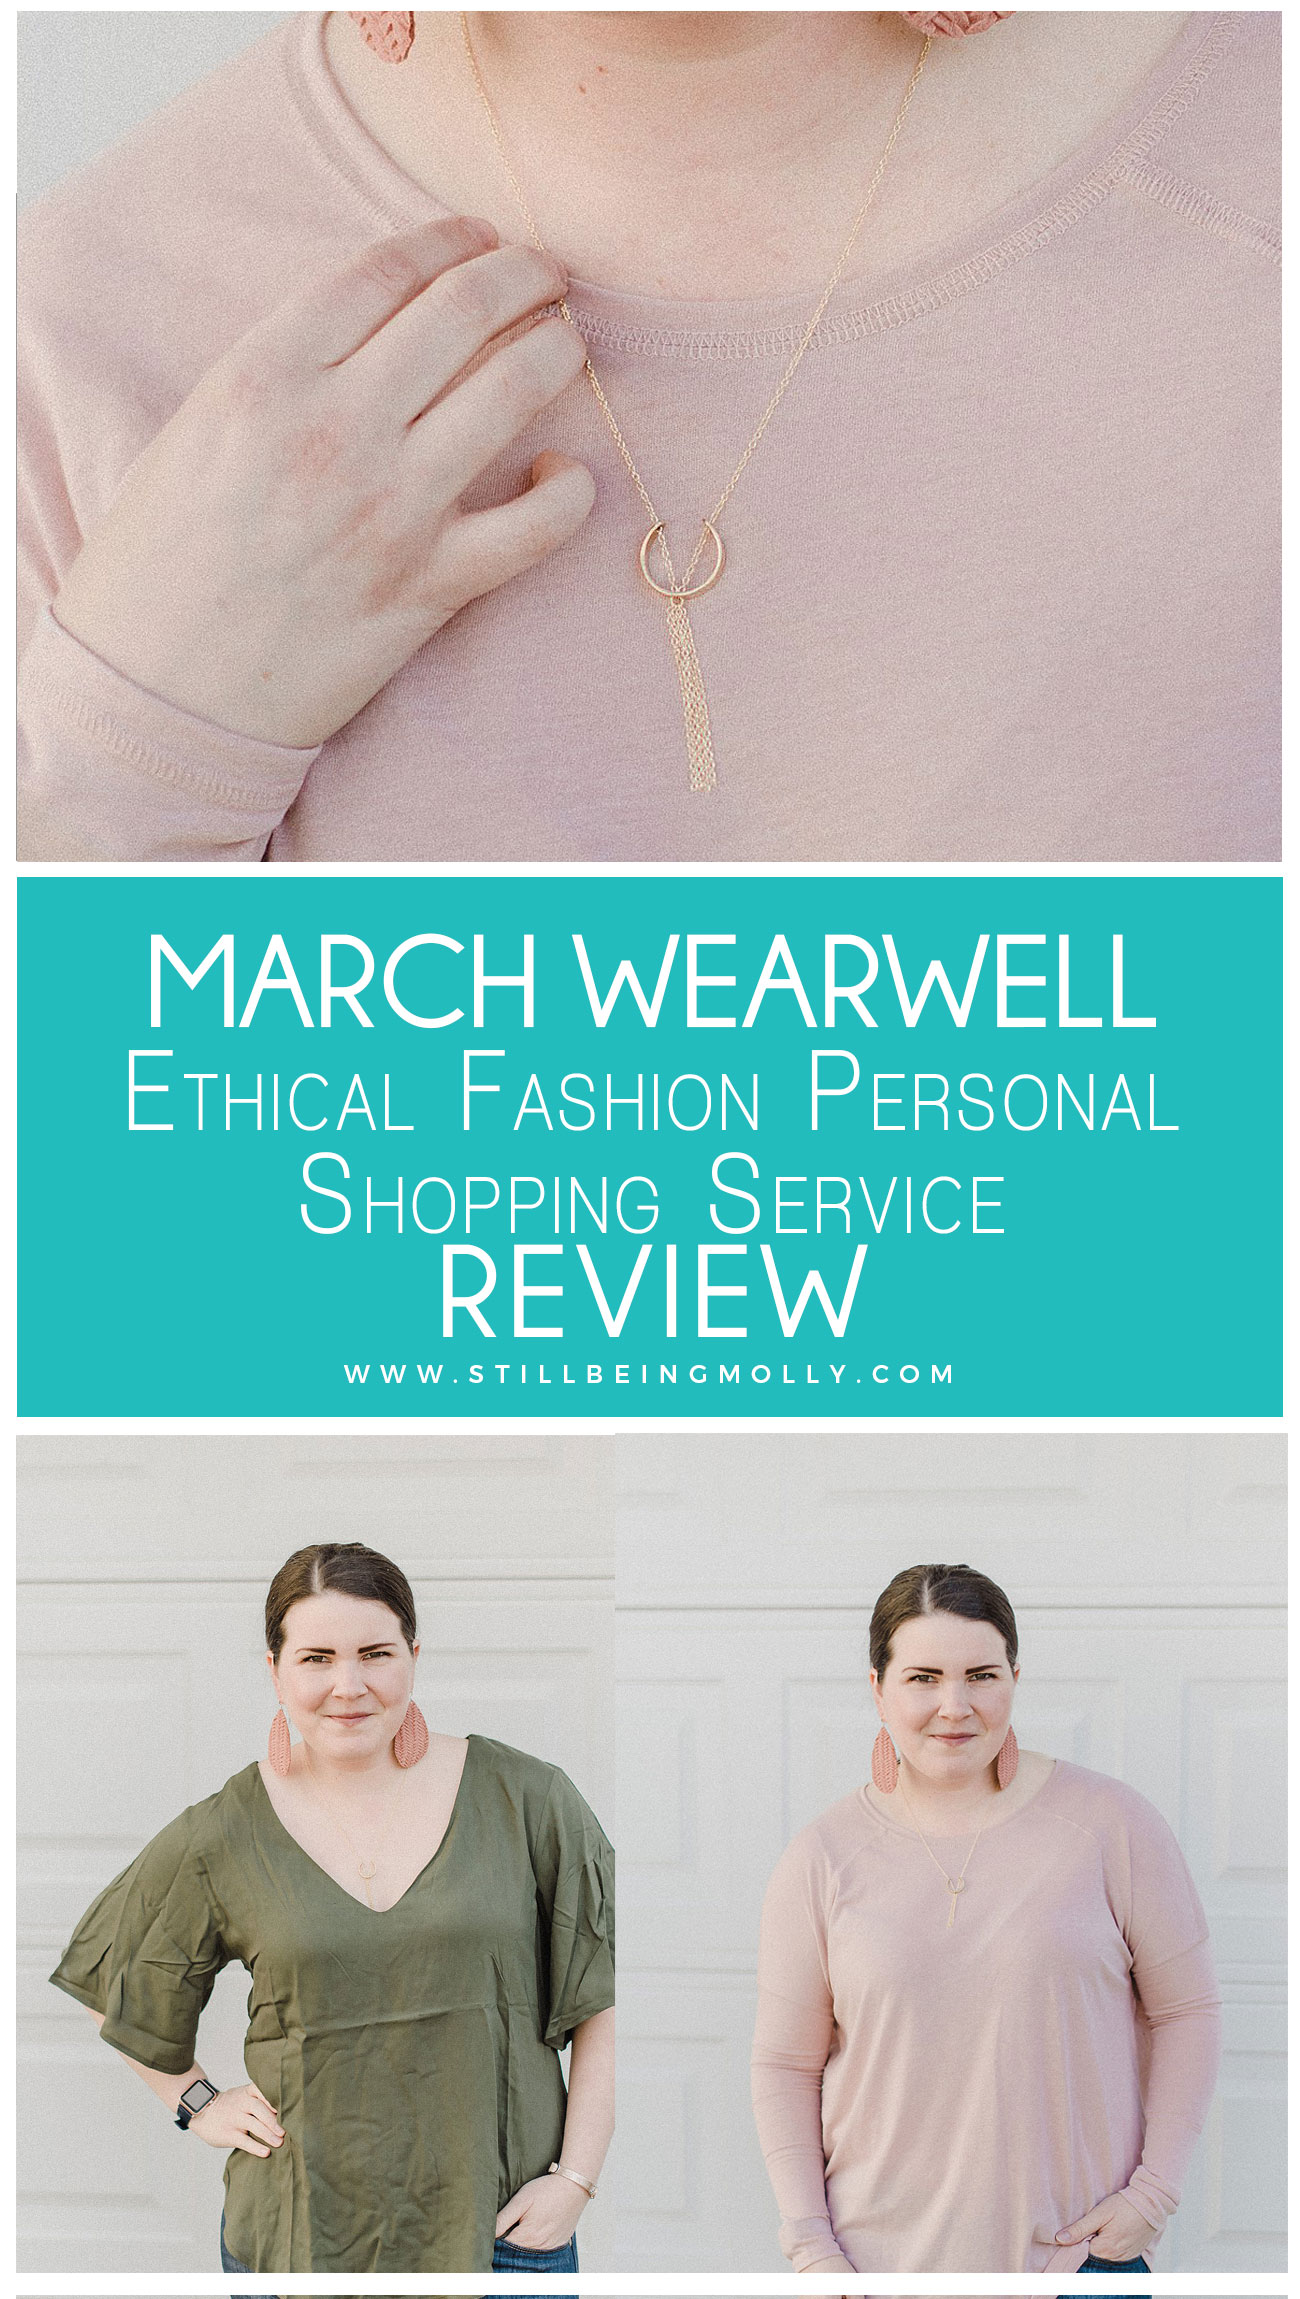 March Wearwell - Ethical Fashion Personal Shopping Service - Review by popular North Carolina ethical fashion blogger Still Being Molly